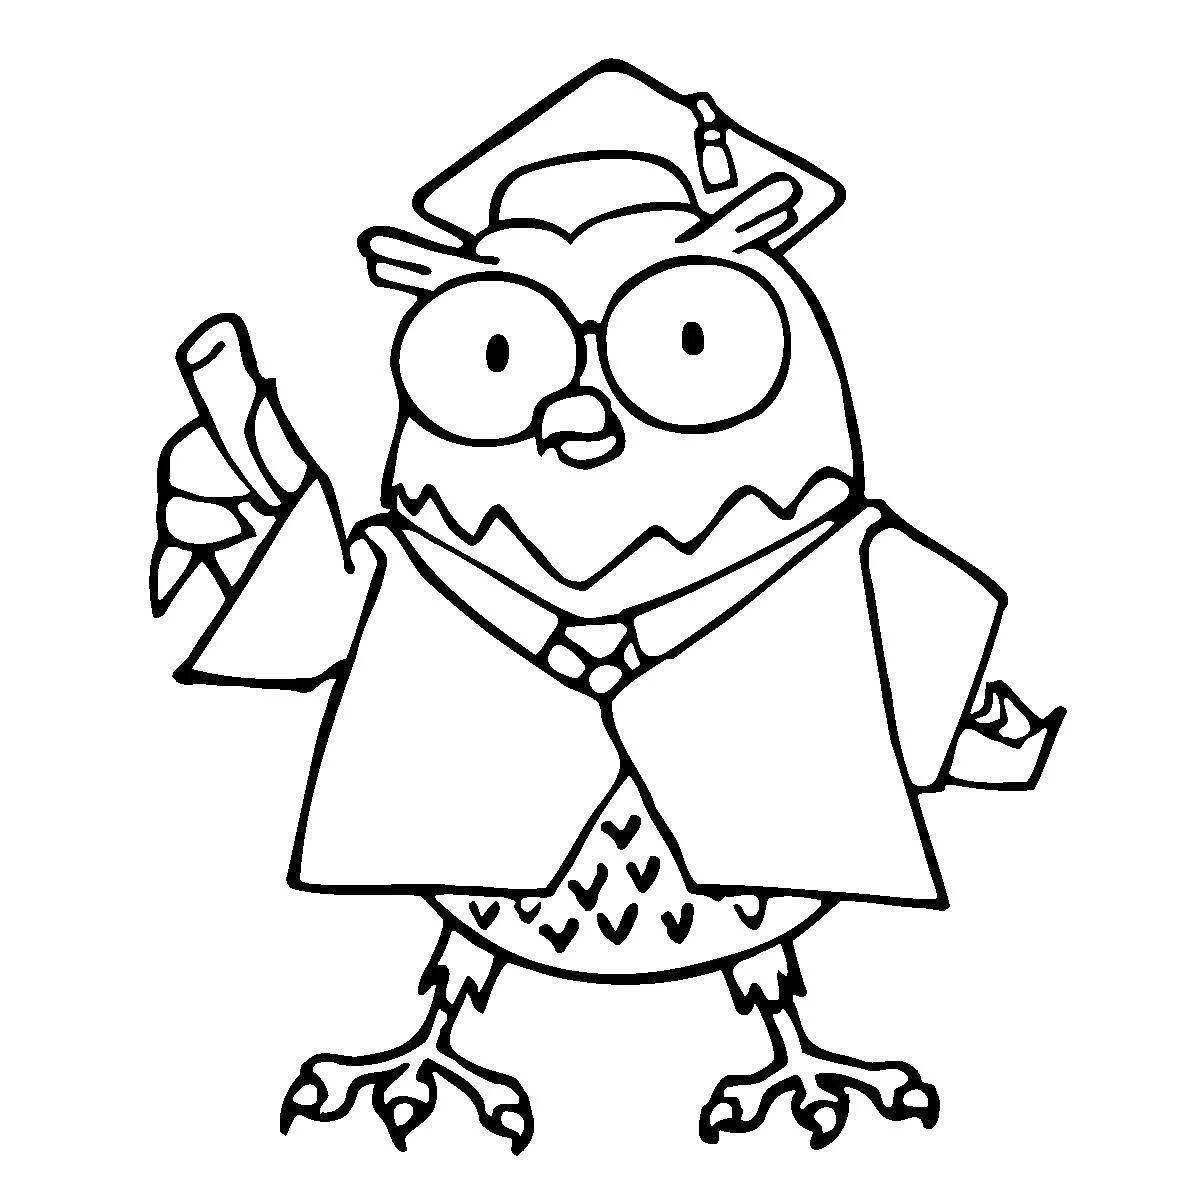 Coloring page wise owl with feather